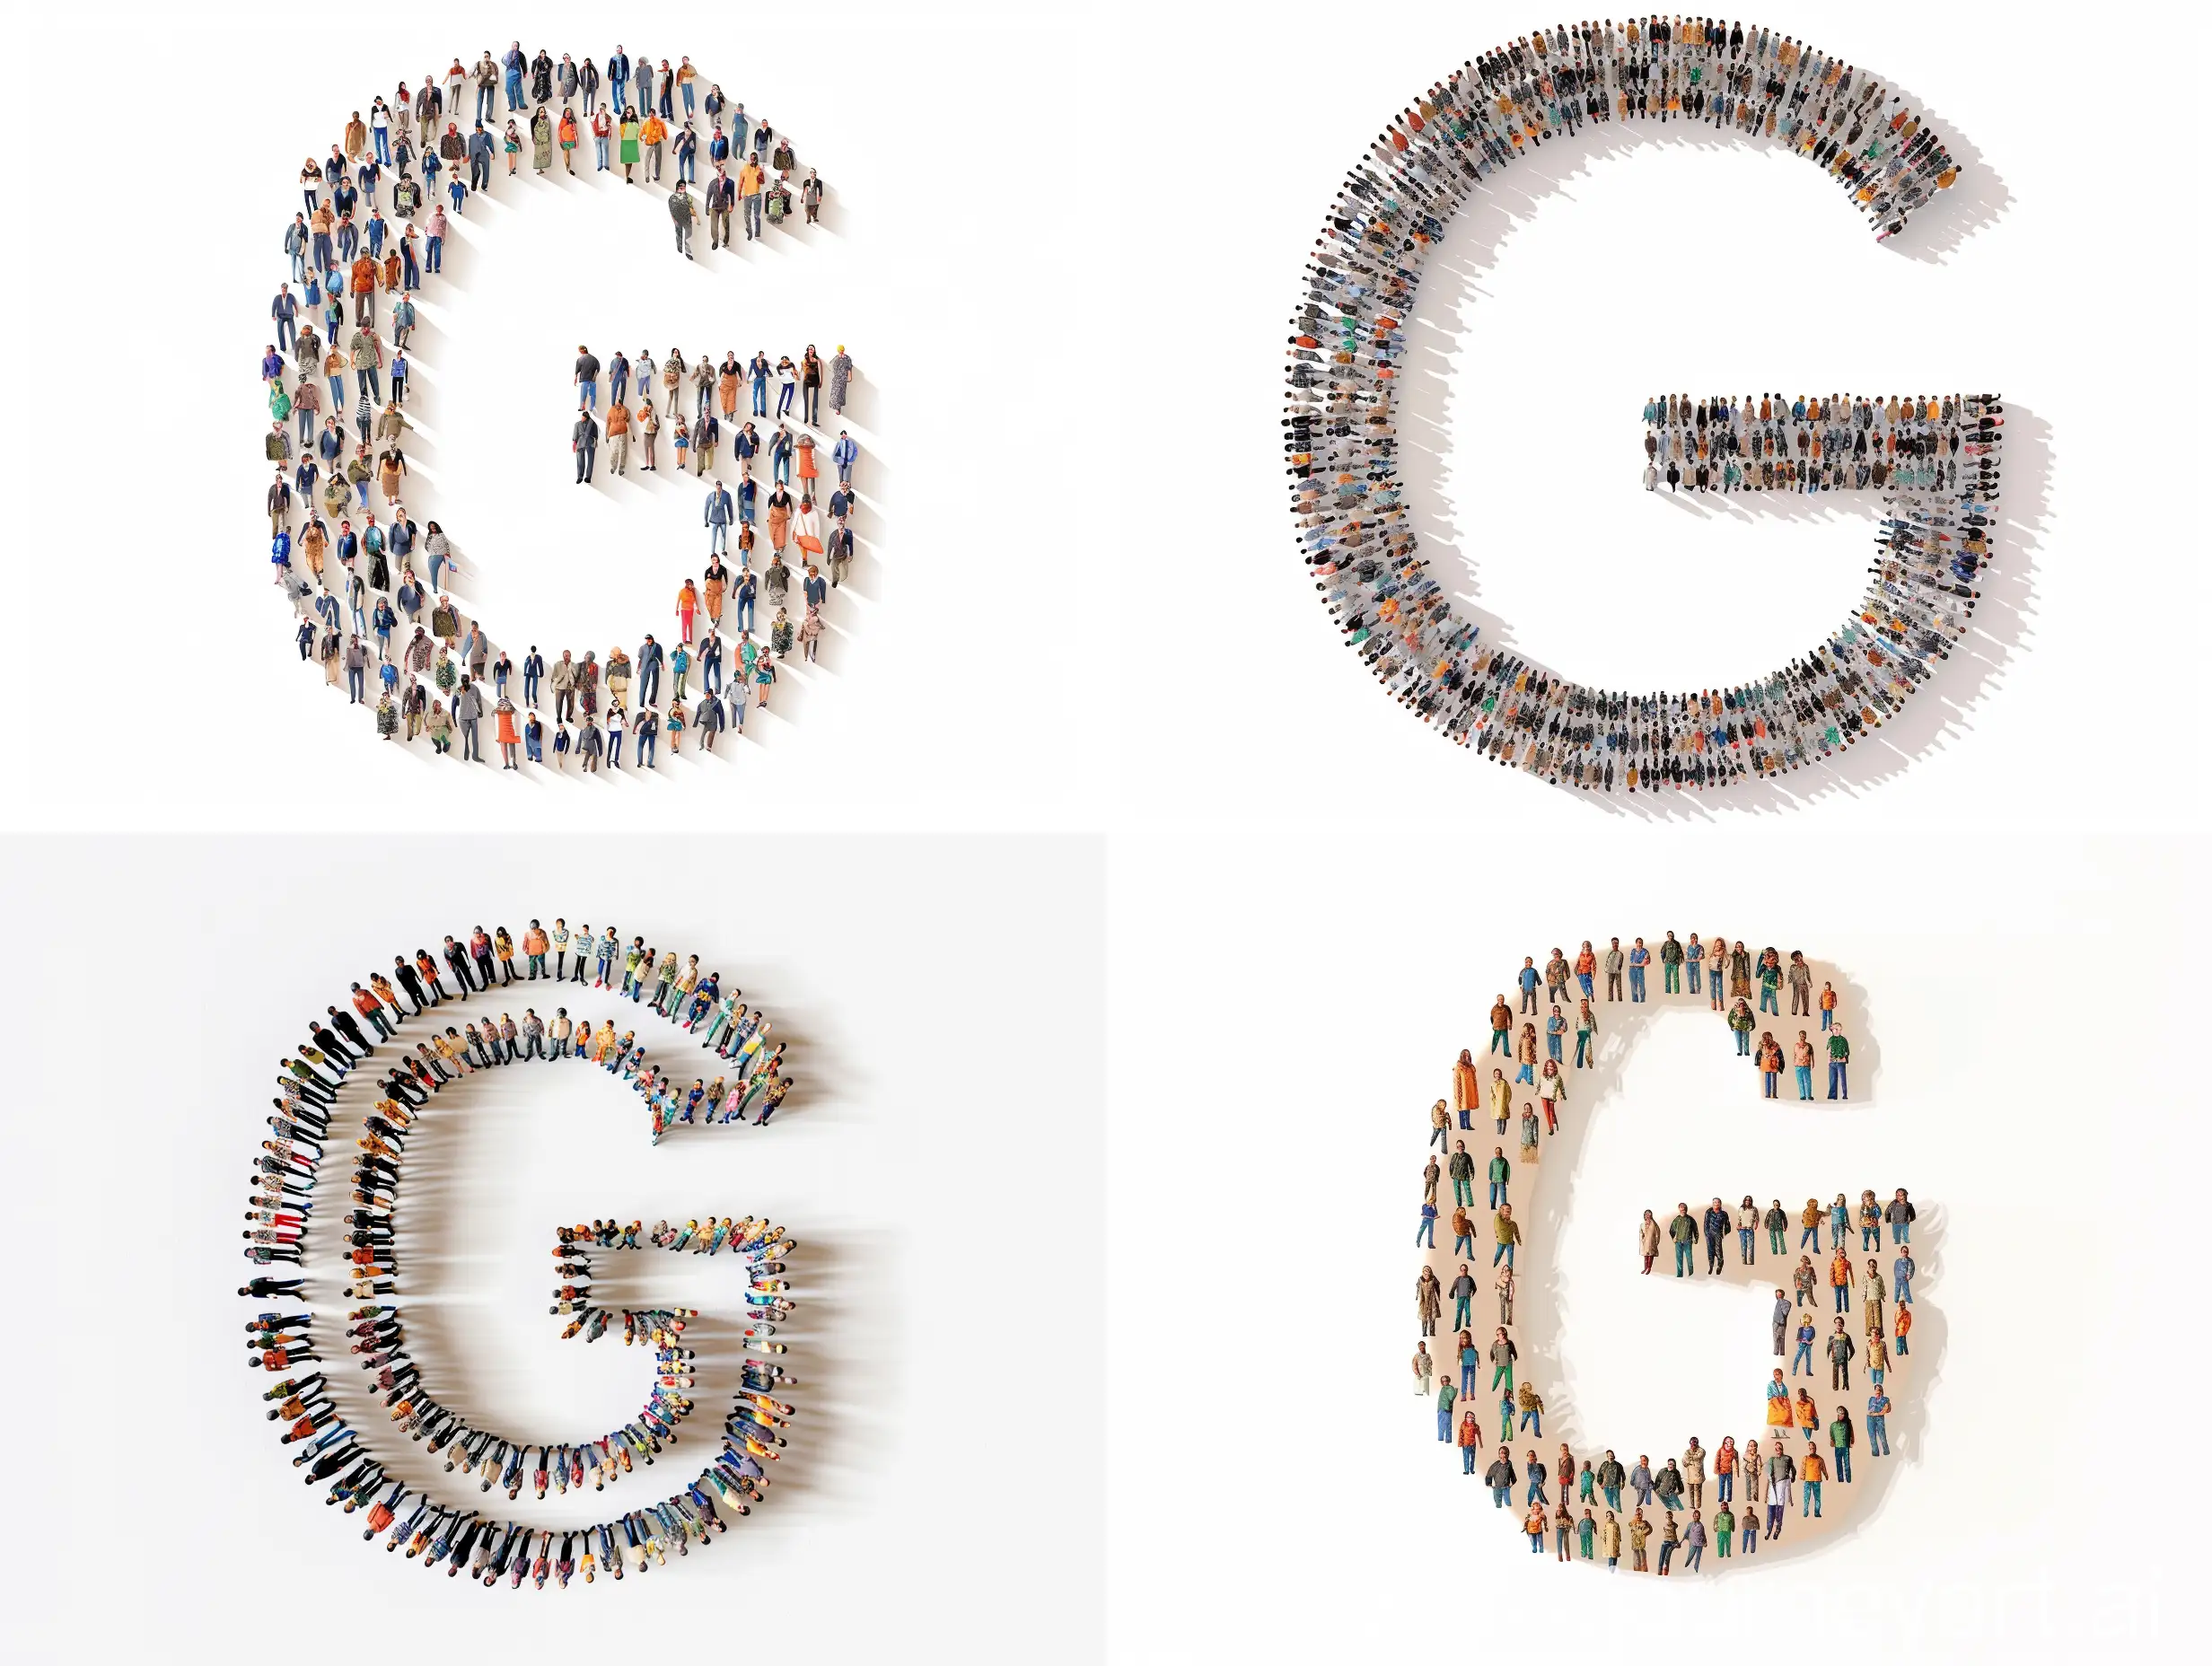 Human-Letter-G-Formation-on-White-Background